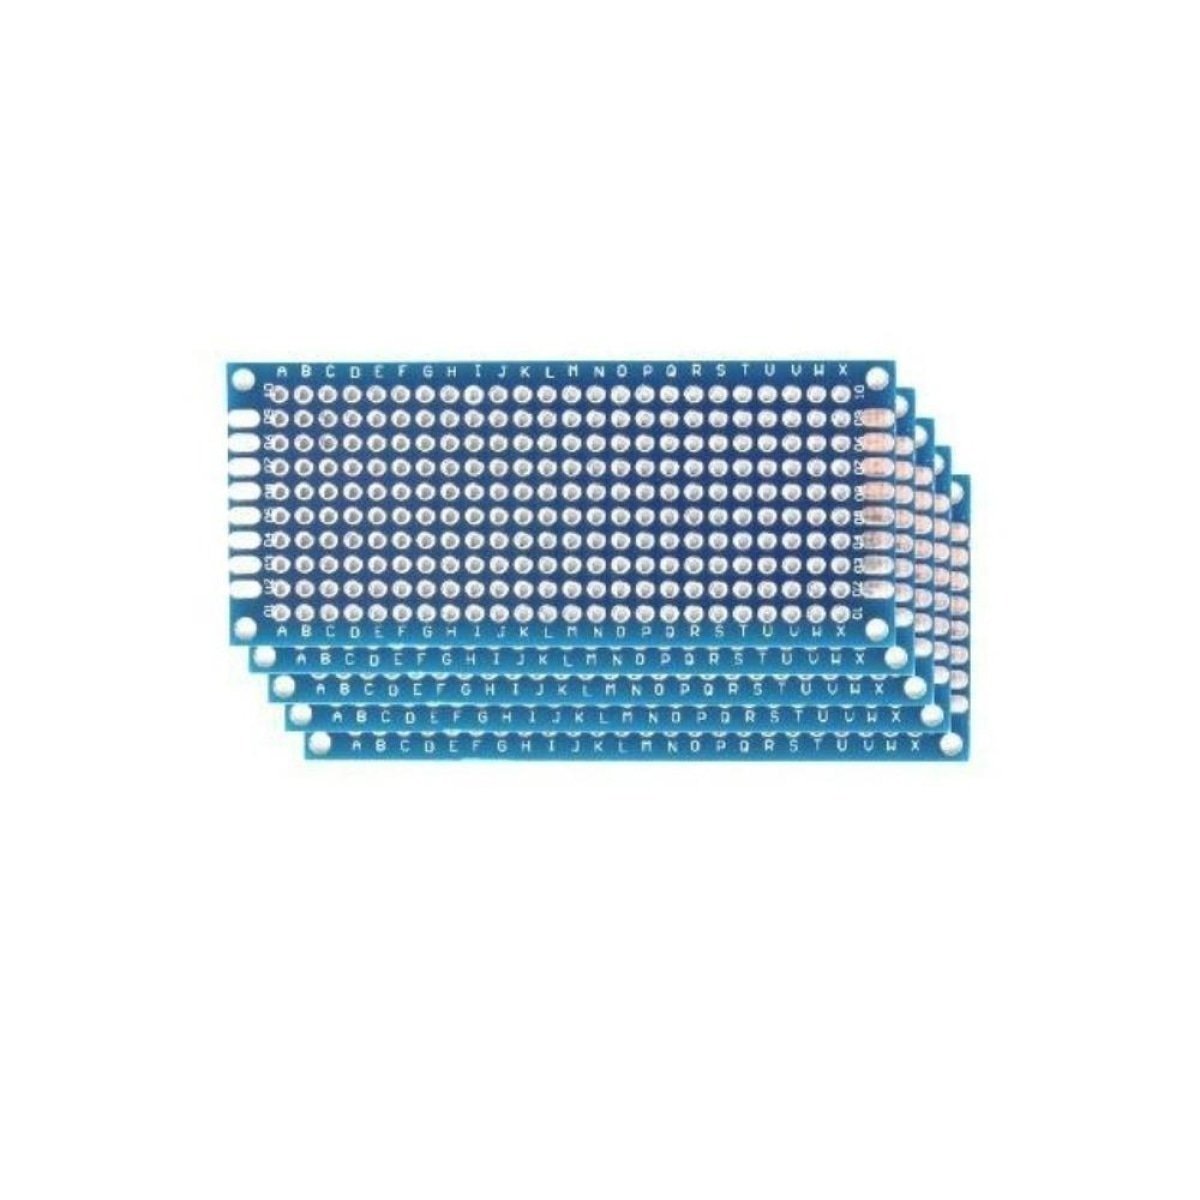 10pcs 30x70mm Double Sided Prototyping Board 3x7cm 7x3cm - Asia Sell